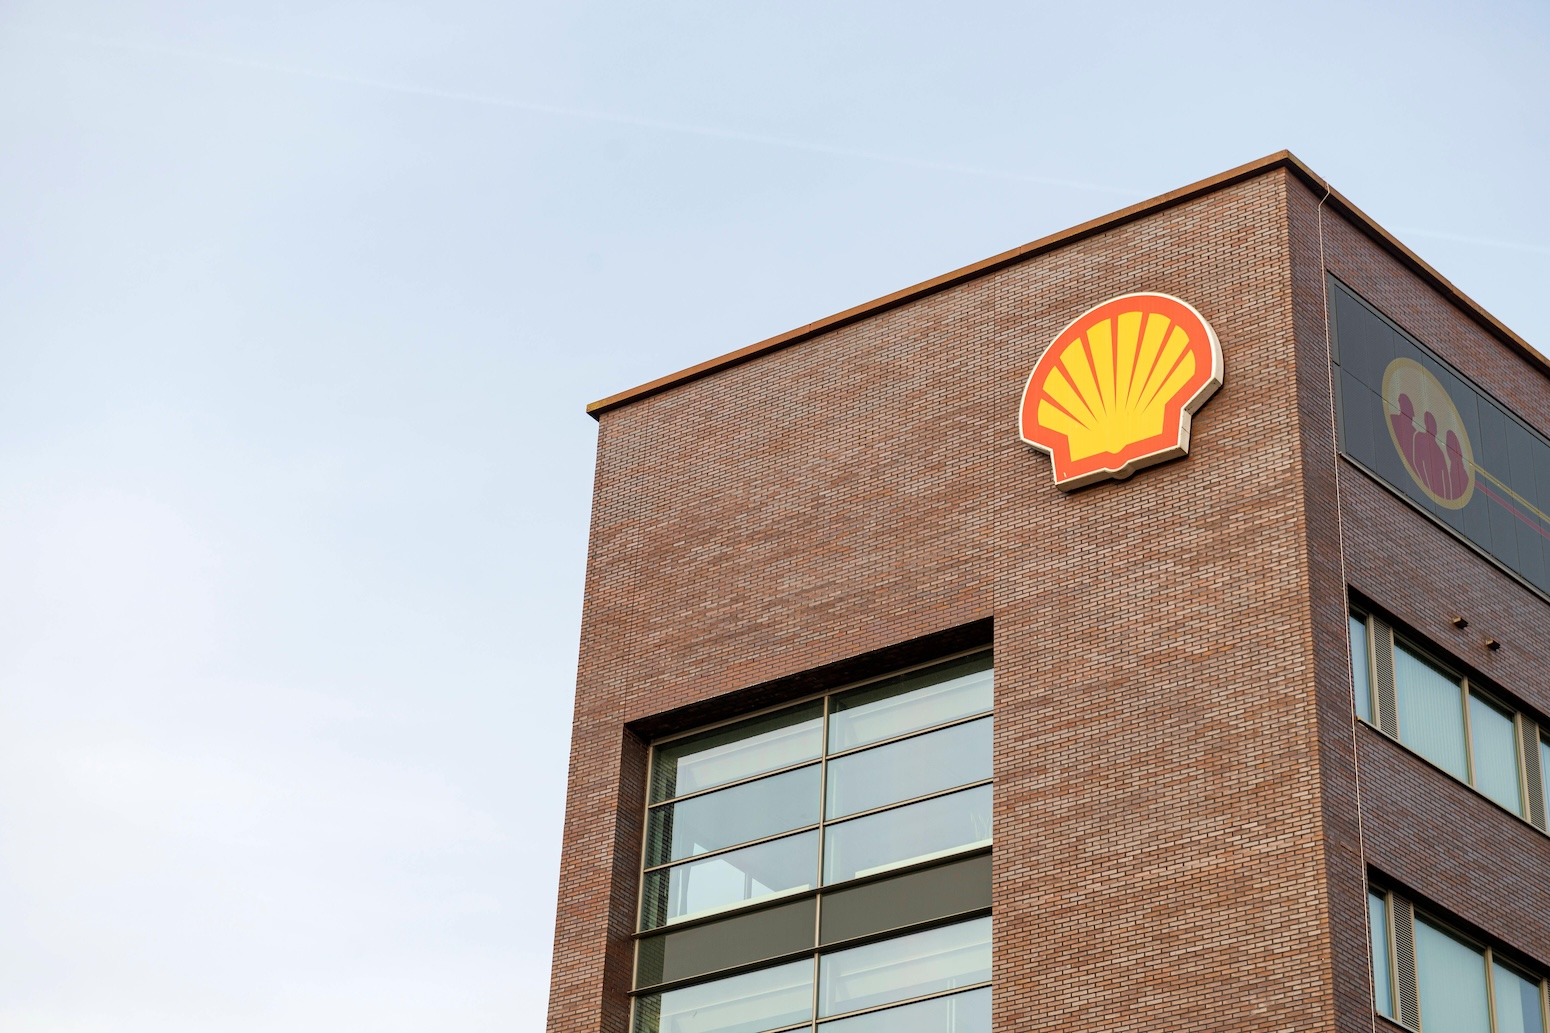 Shell abandons 2035 emissions target and weakens 2030 goal